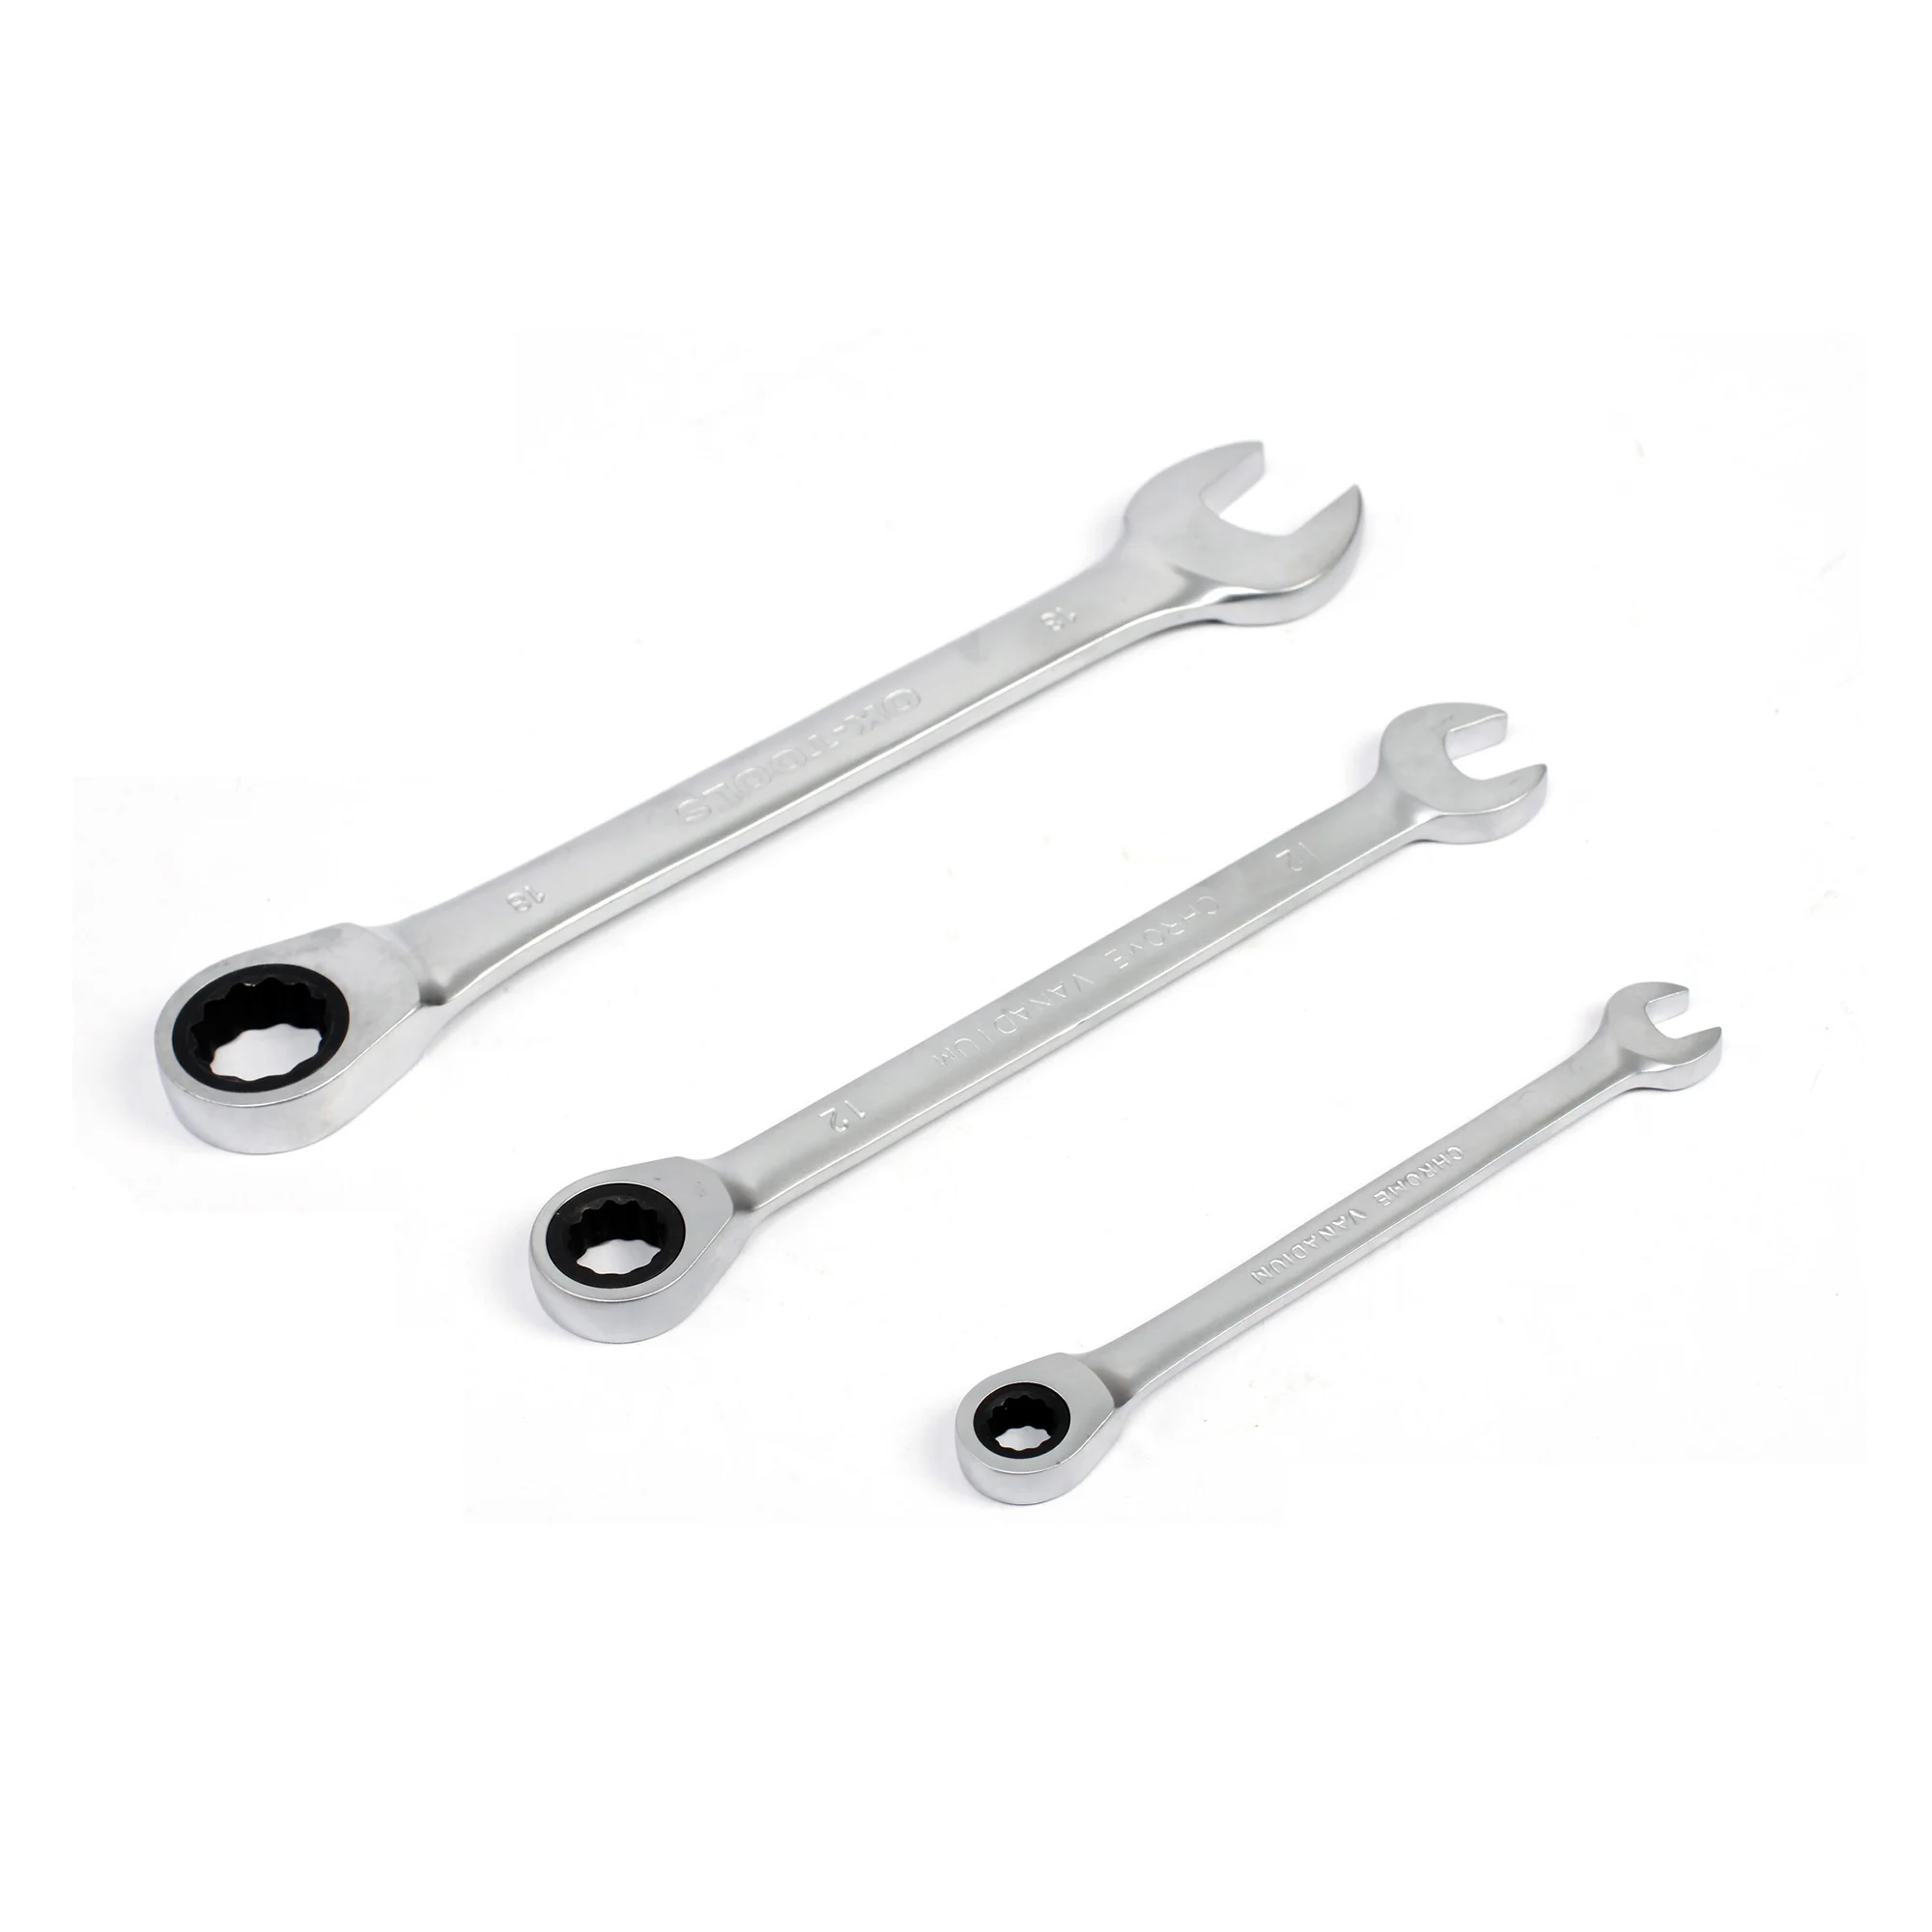 

KAFUWELL WR5011H Hot Sale CRV High Quality Combination Open Eend Fixed Head Ratchet Wrench Supplier